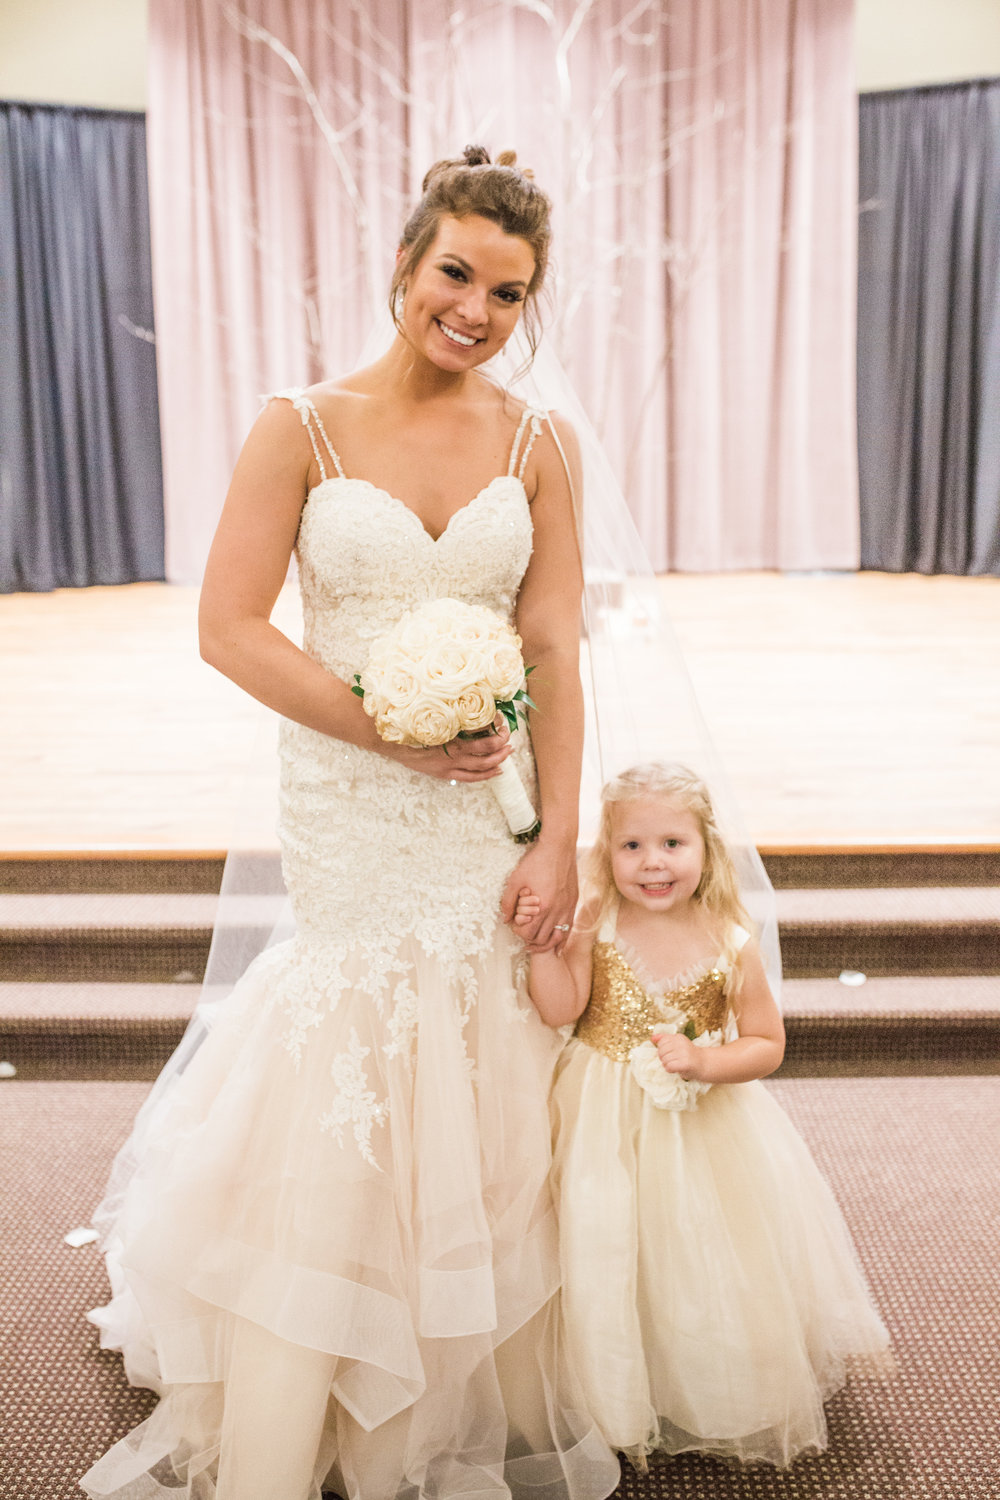 Bride and Flower Girl at alter